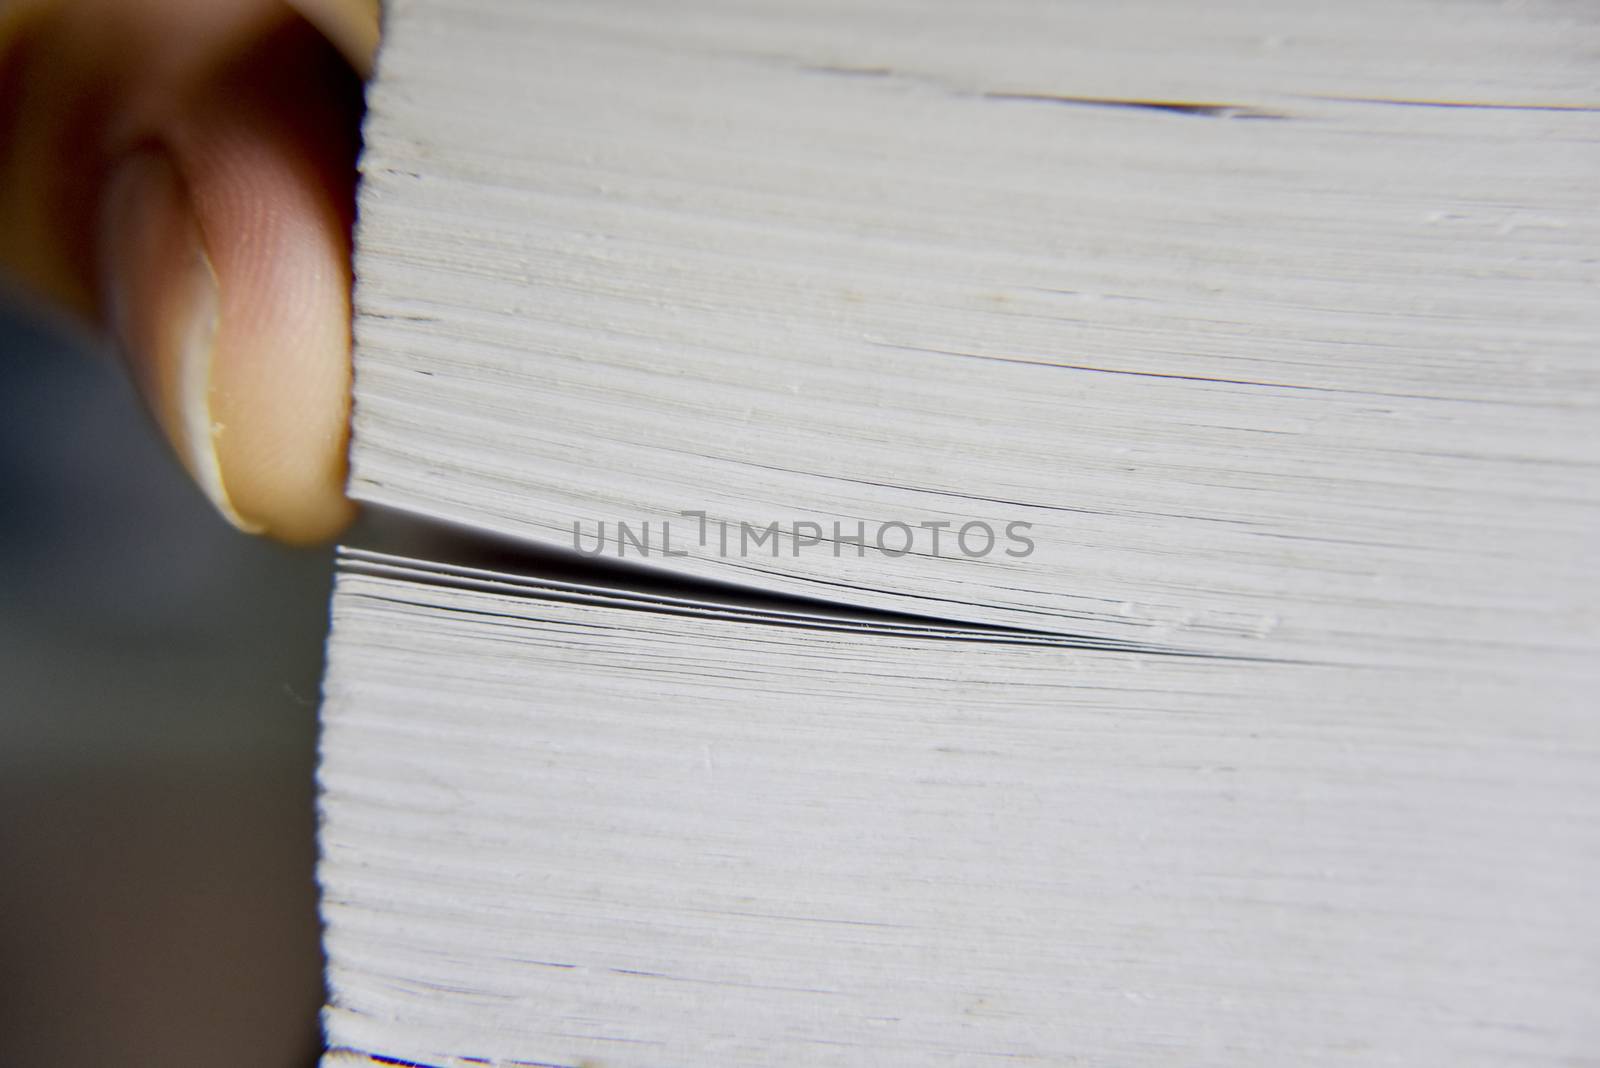 selective focus, macro look at the pages of the thick book by yulia_sanatina